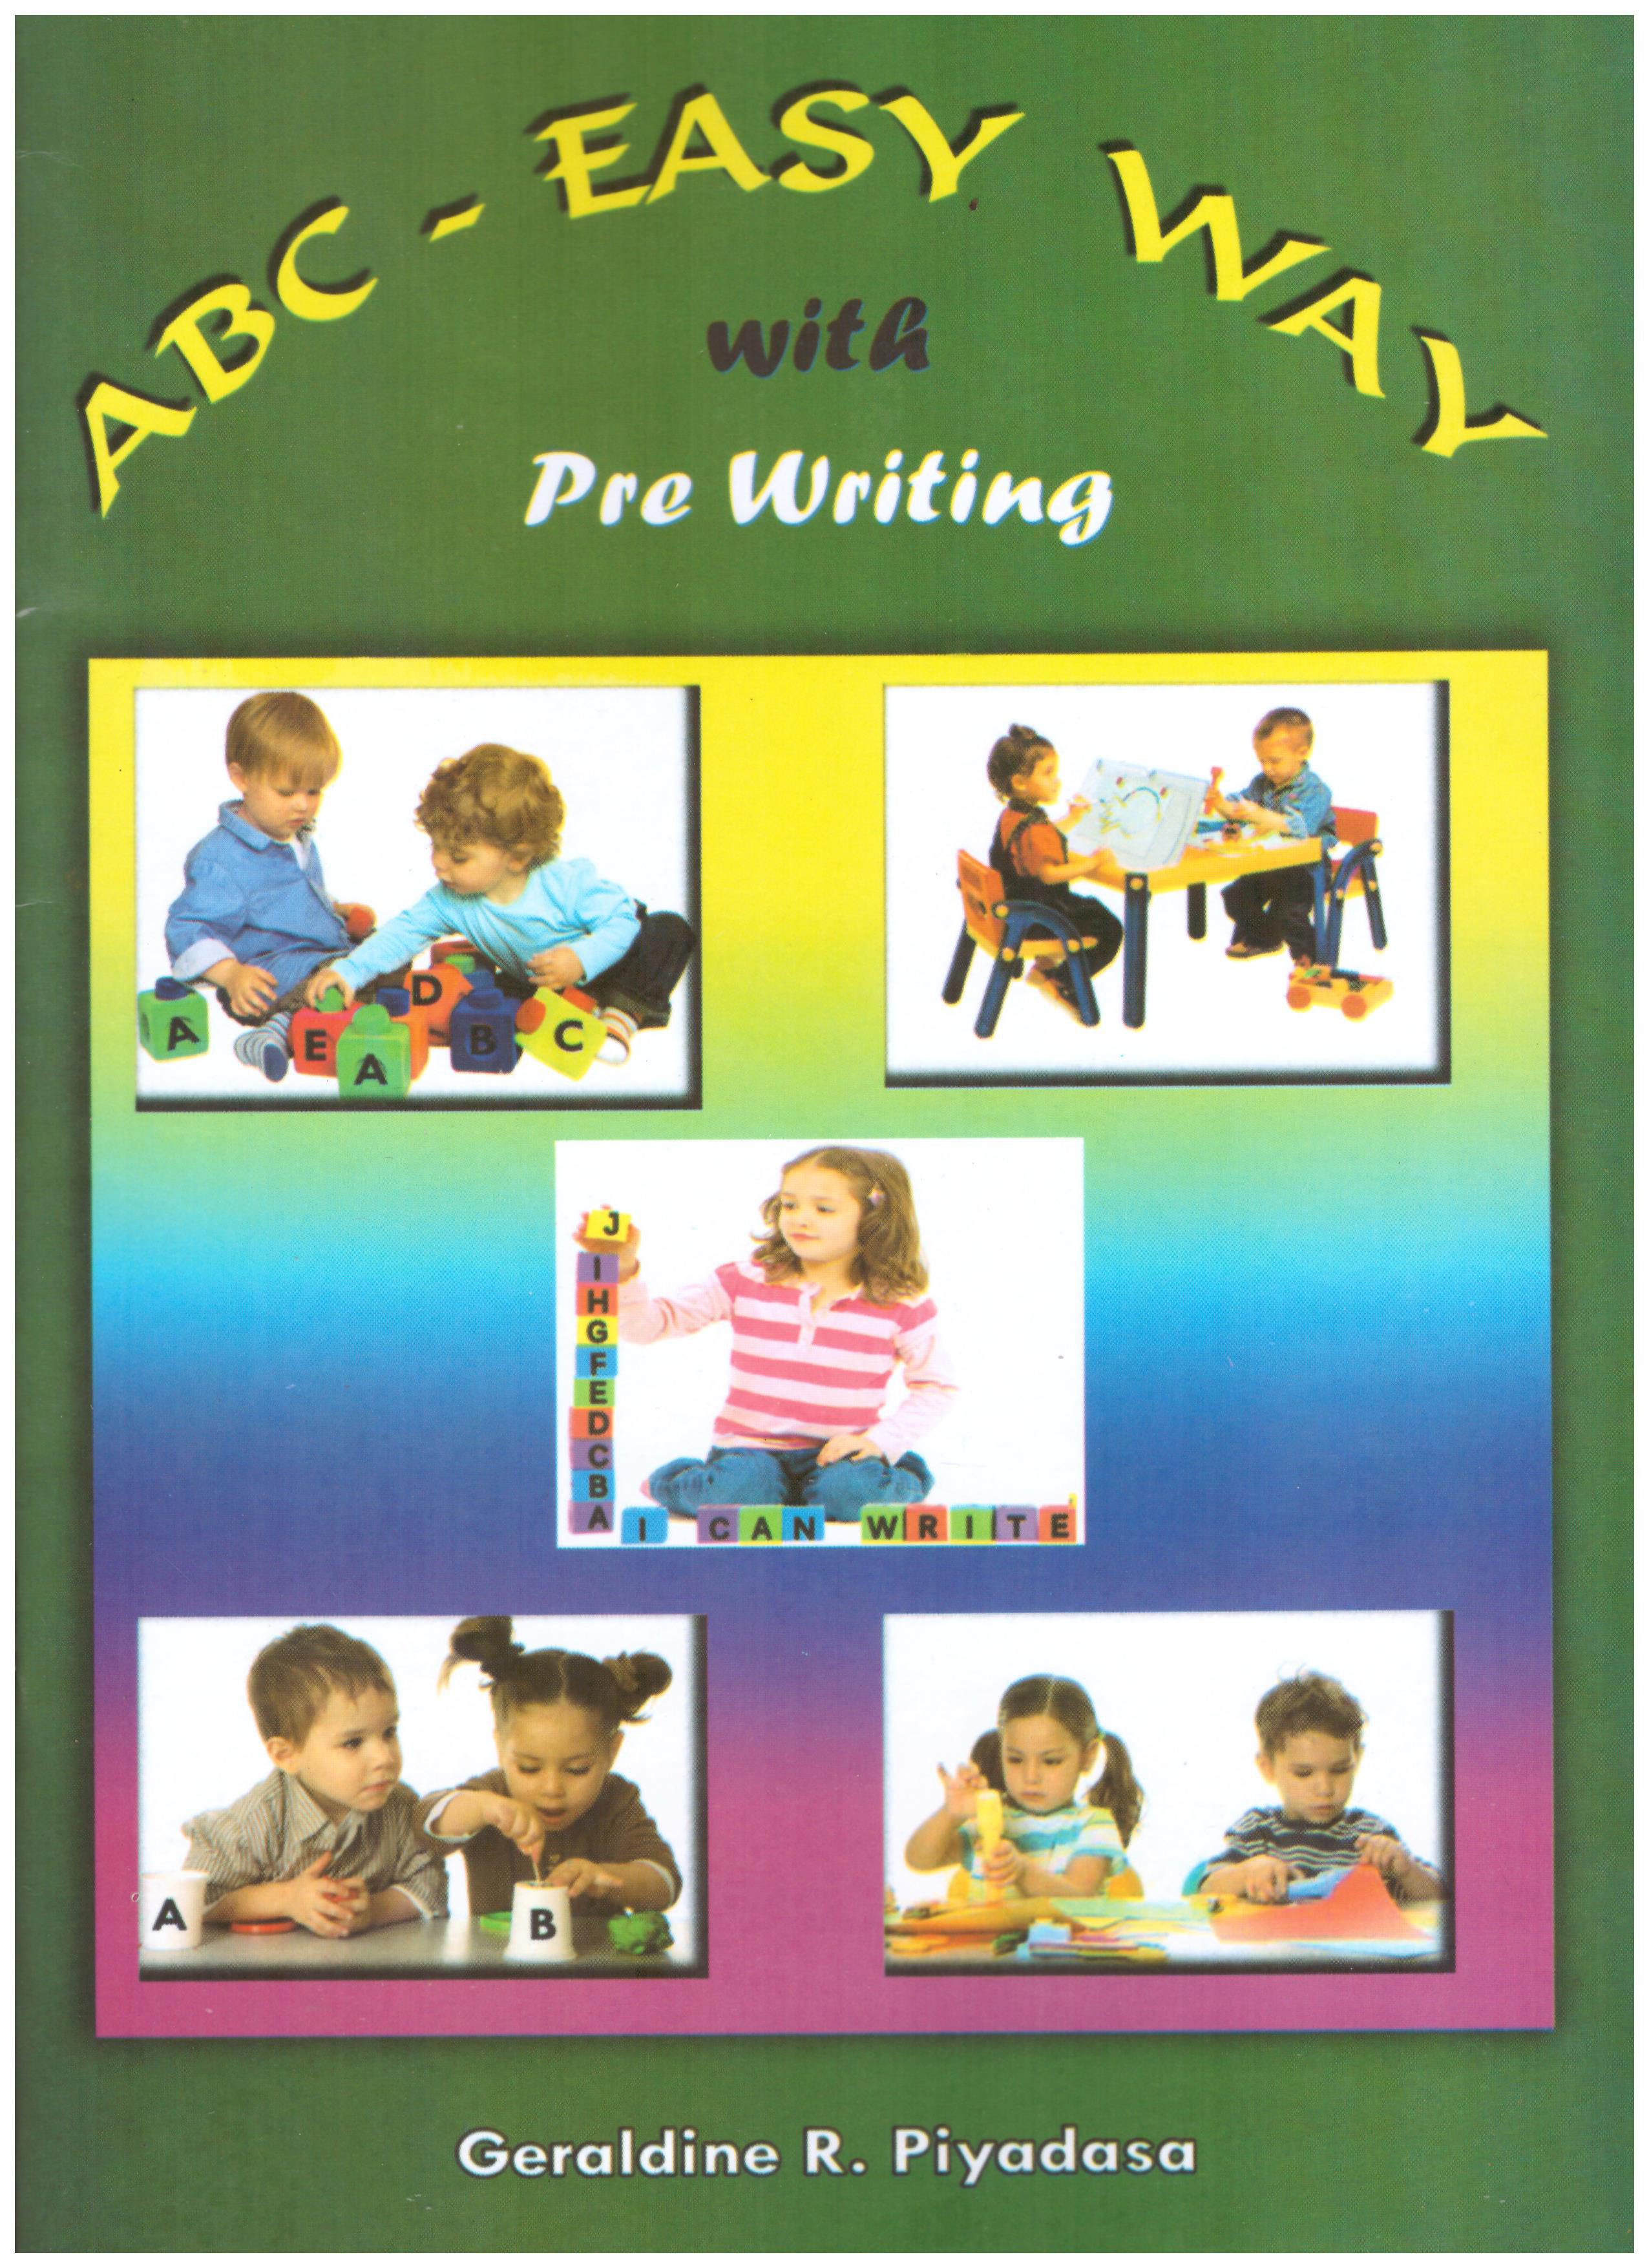 ABC EASY WAY WITH PRE WRITING - 9559770829003